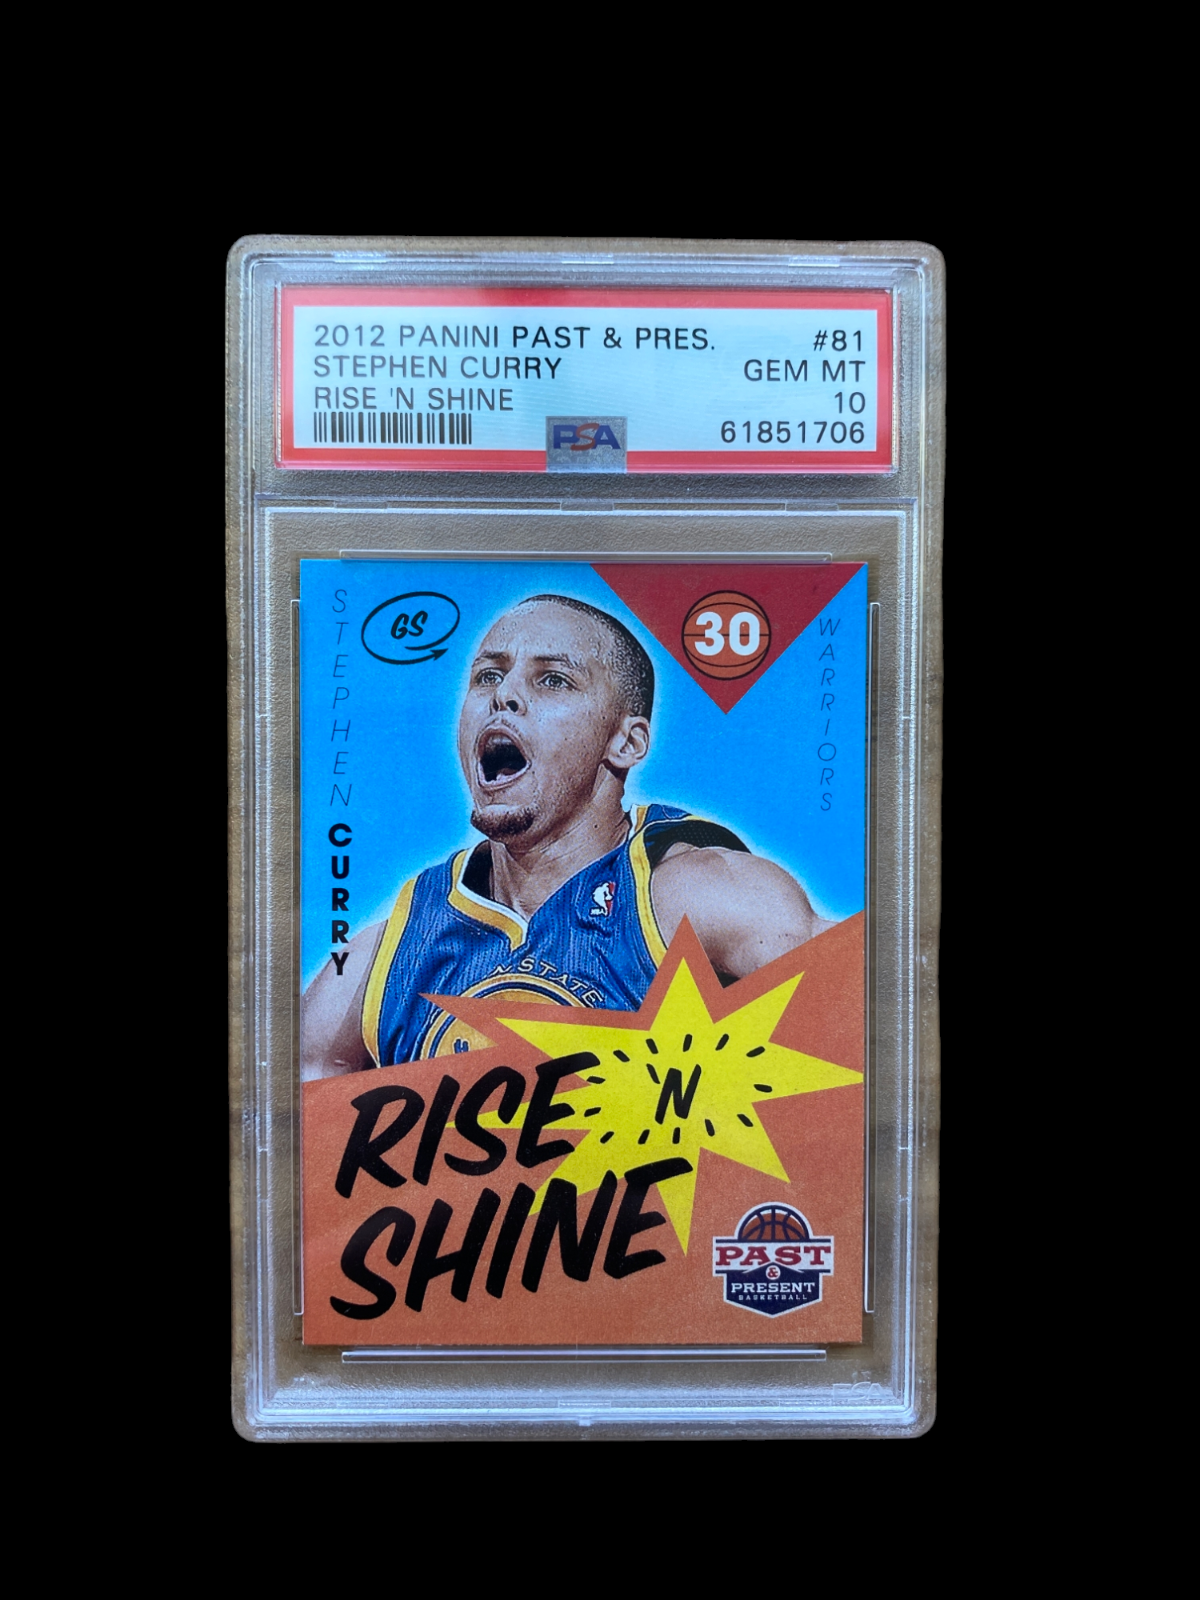 100% Authentic Stephen Curry 2012 Panini Past & Pres. Rise 'N Shine #81 PSA 10